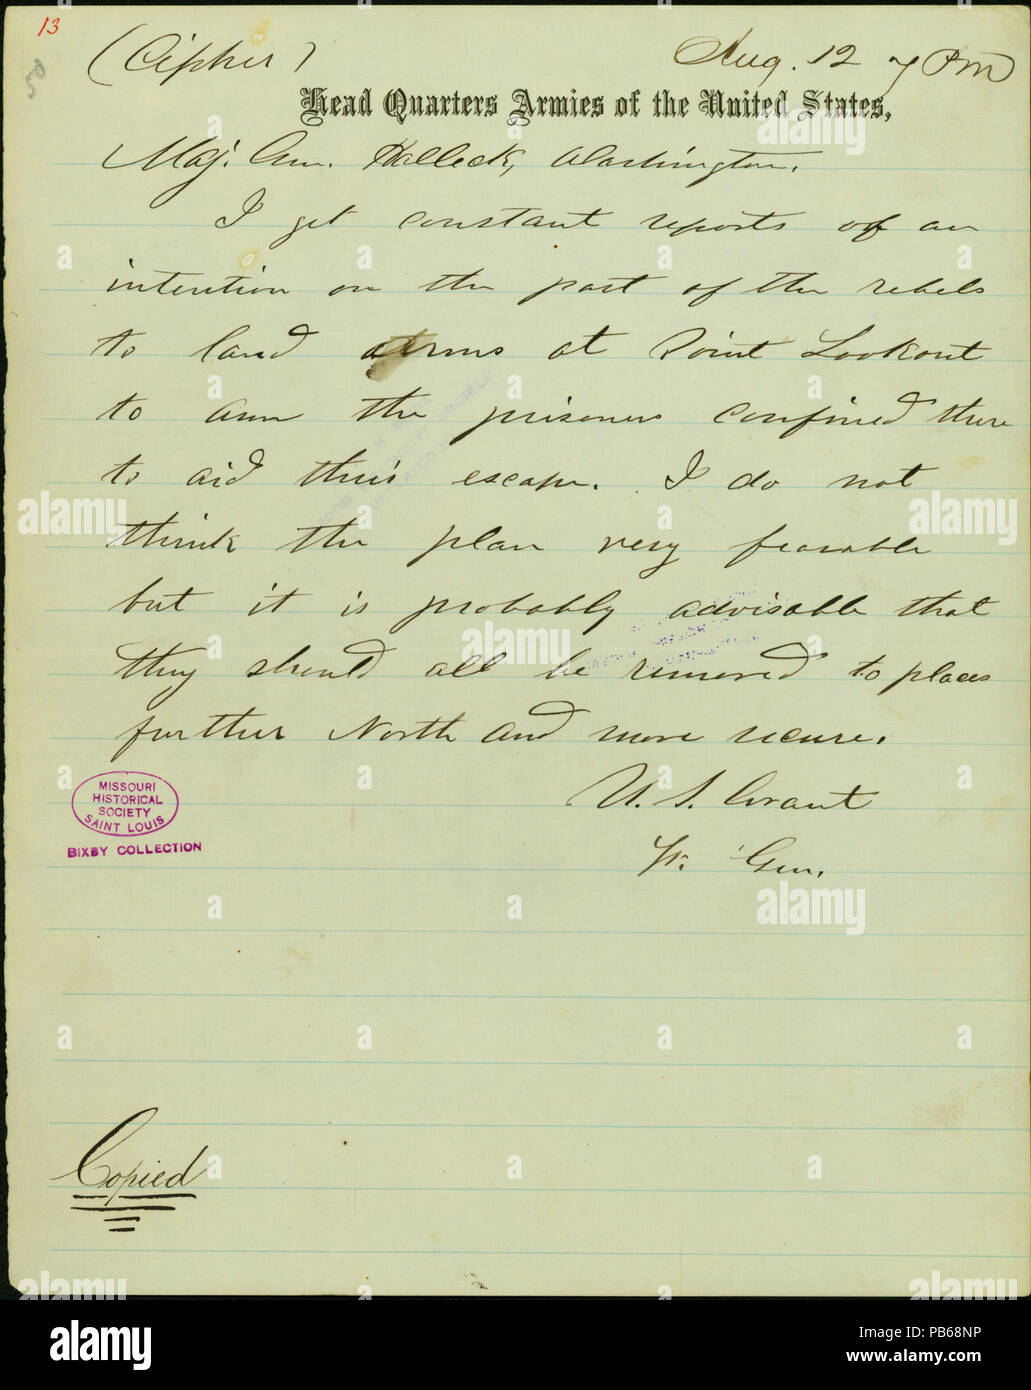 913 Letter signed U.S. Grant, Head Quarters Armies of the United States, to Maj. Gen. Halleck, Washington, August 12, 1864 Stock Photo